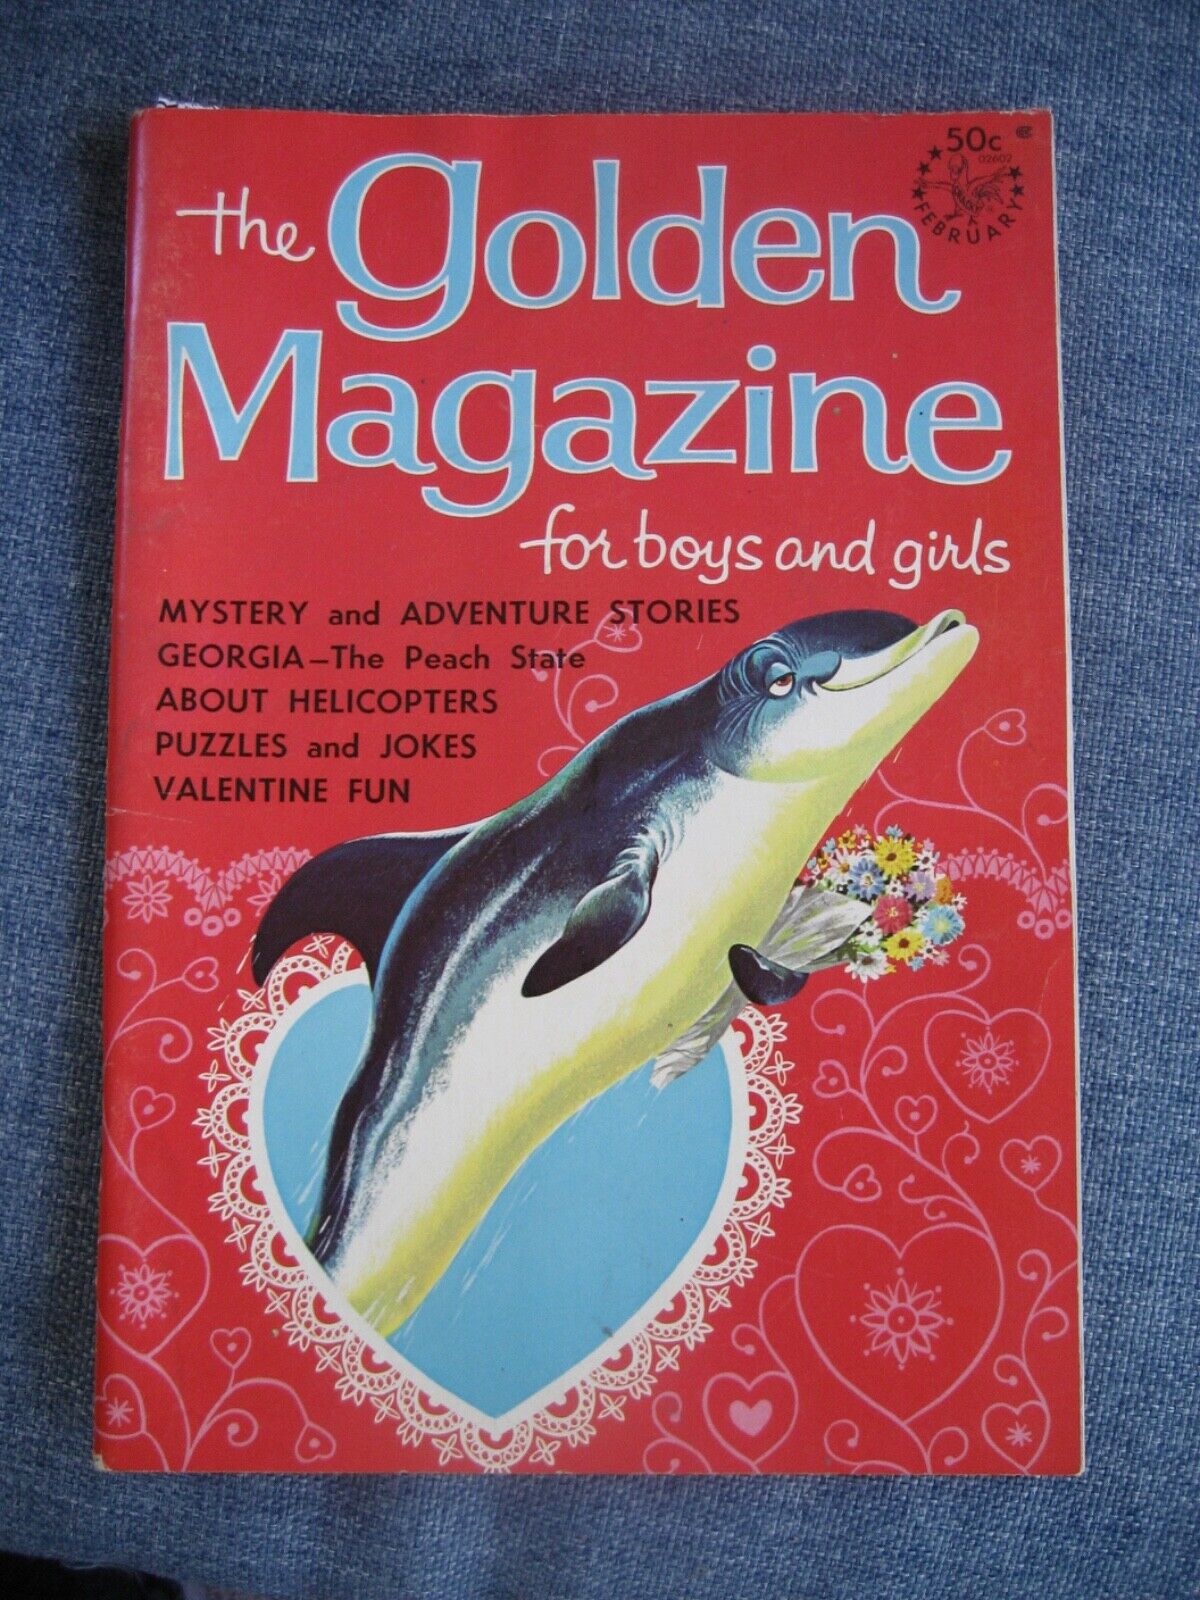 The Golden Magazine for Boys and Girls February Vintage 1966 Vol 3. No. 2